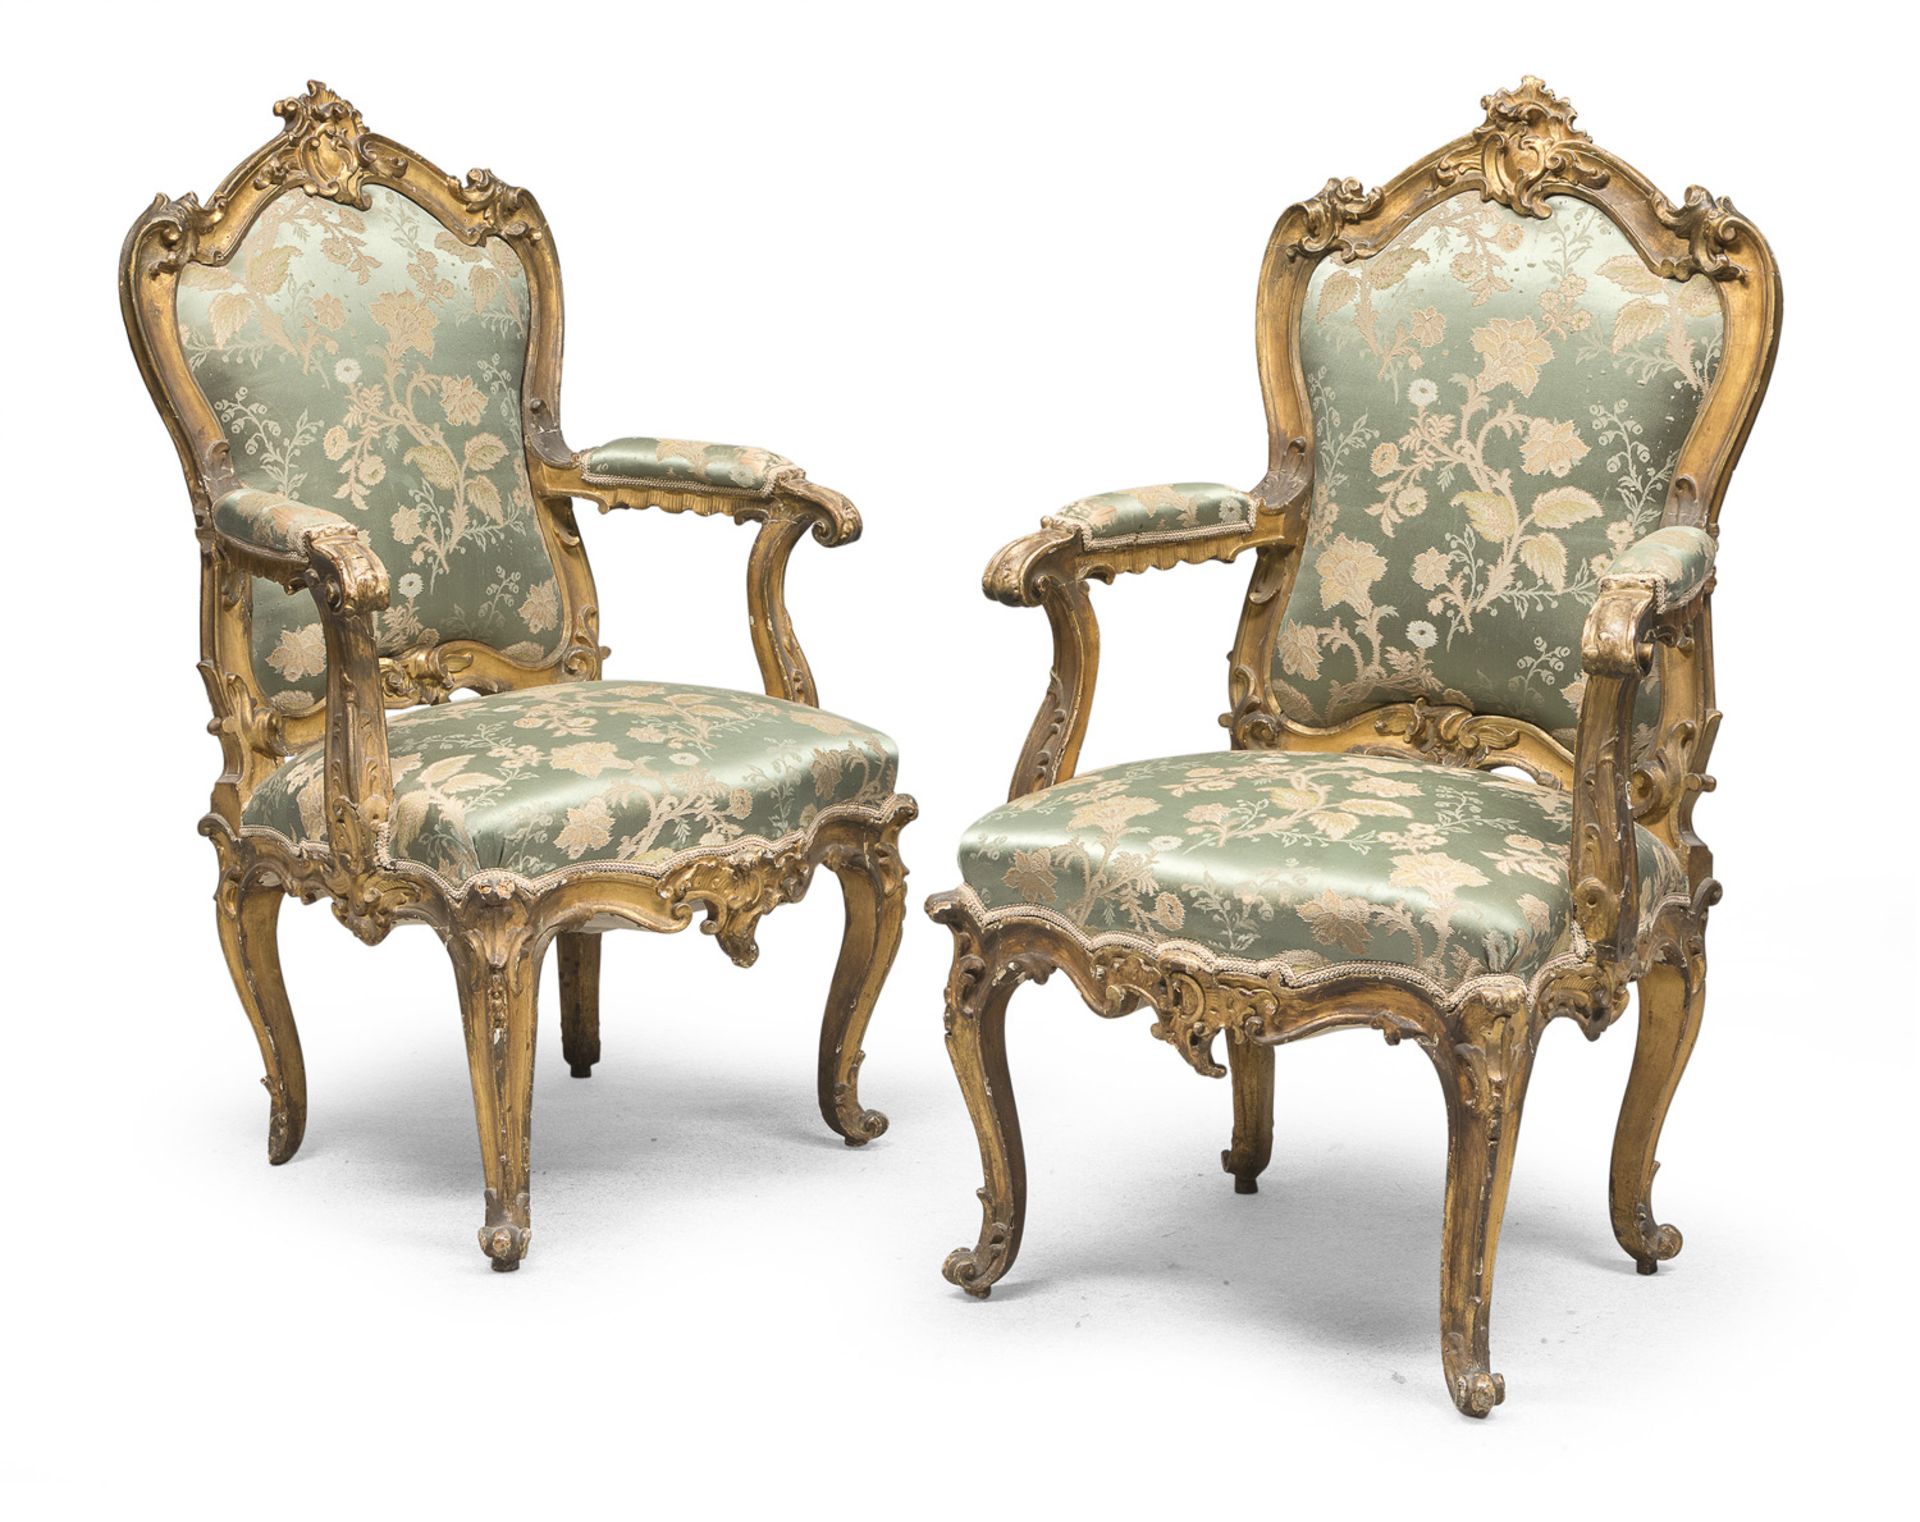 BEAUTIFUL PAIR OF ARMCHAIRS IN GILTWOOD PROBABLY VENICE 18TH CENTURY